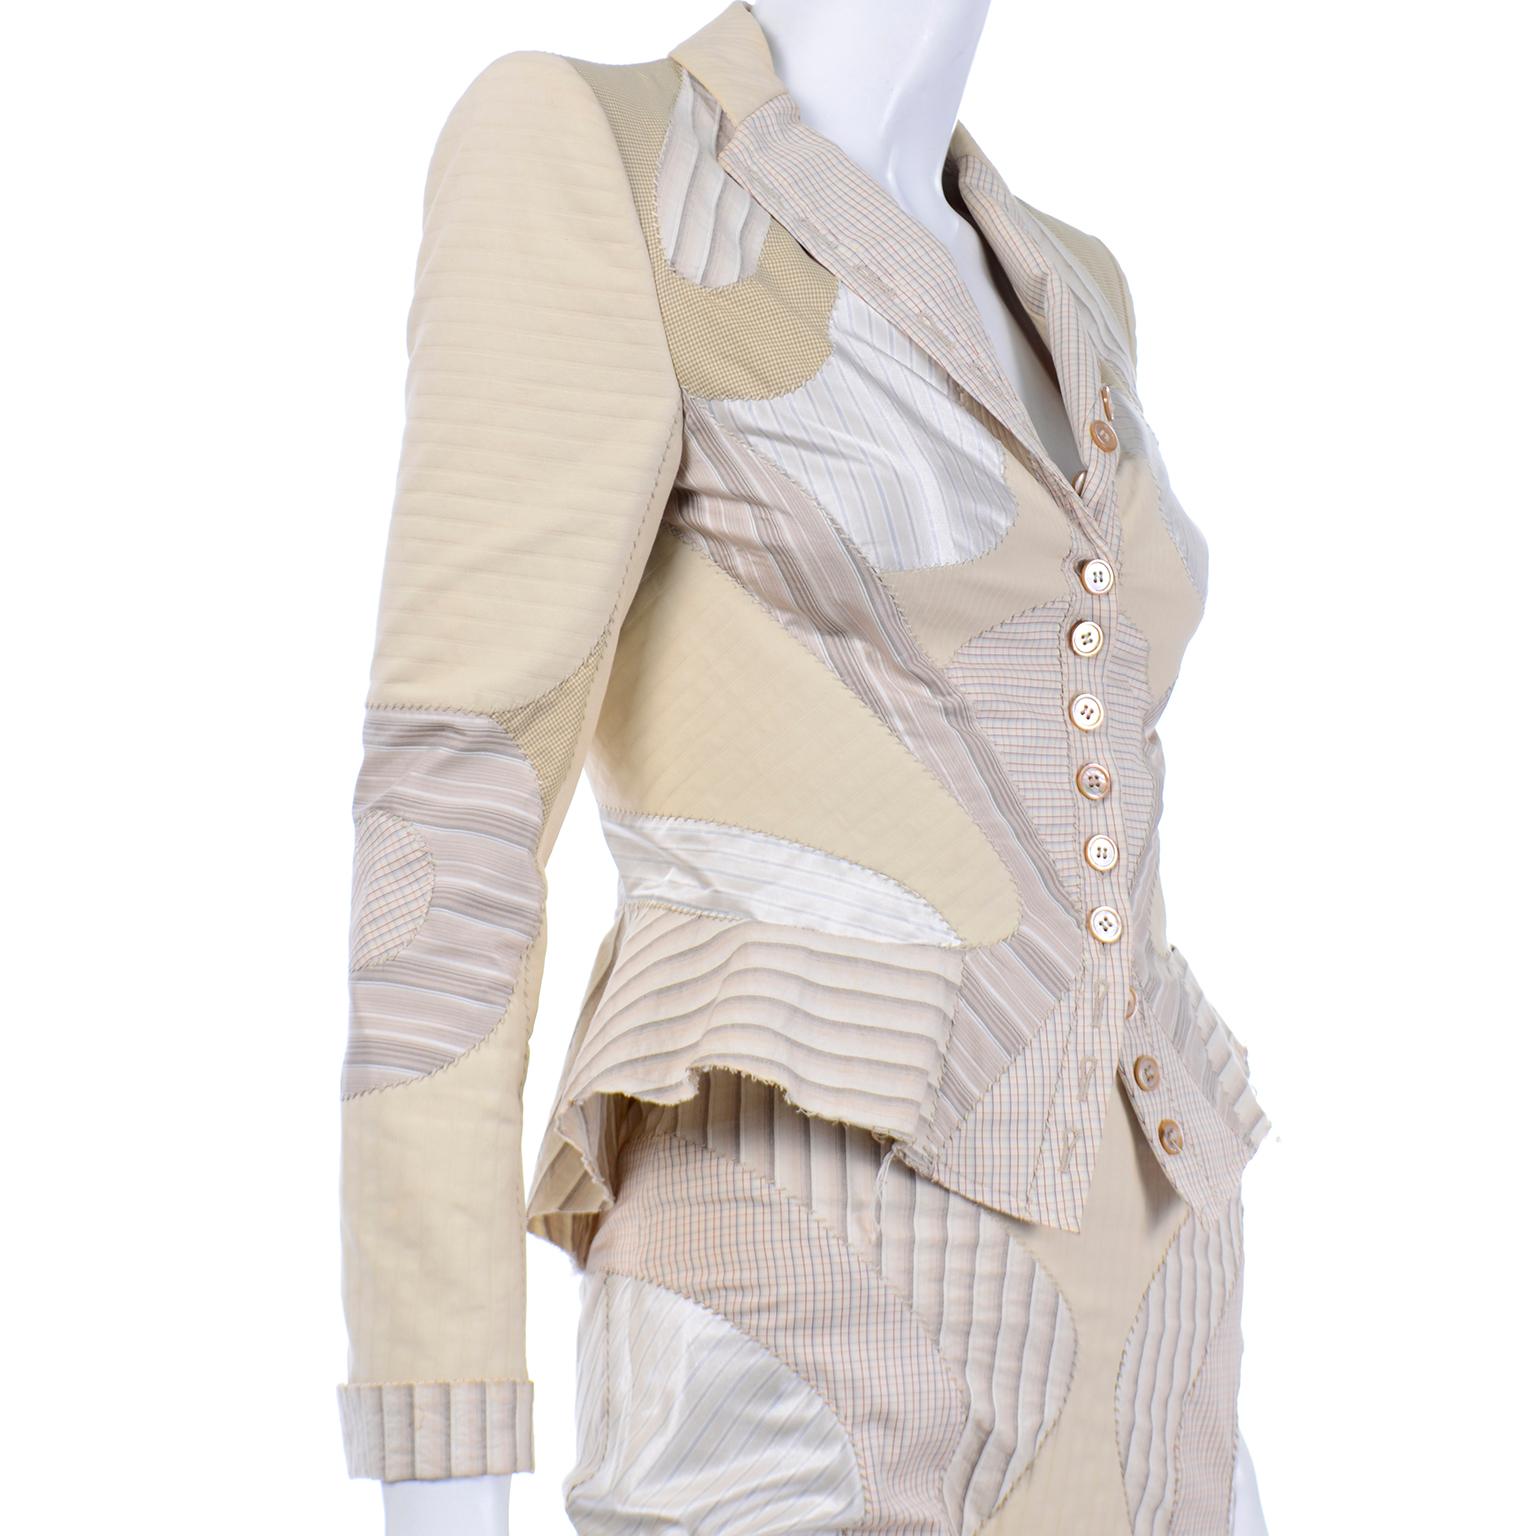 Alexander McQueen Spring 2004 Deliverance Patchwork 2pc Skirt & Jacket Outfit  3